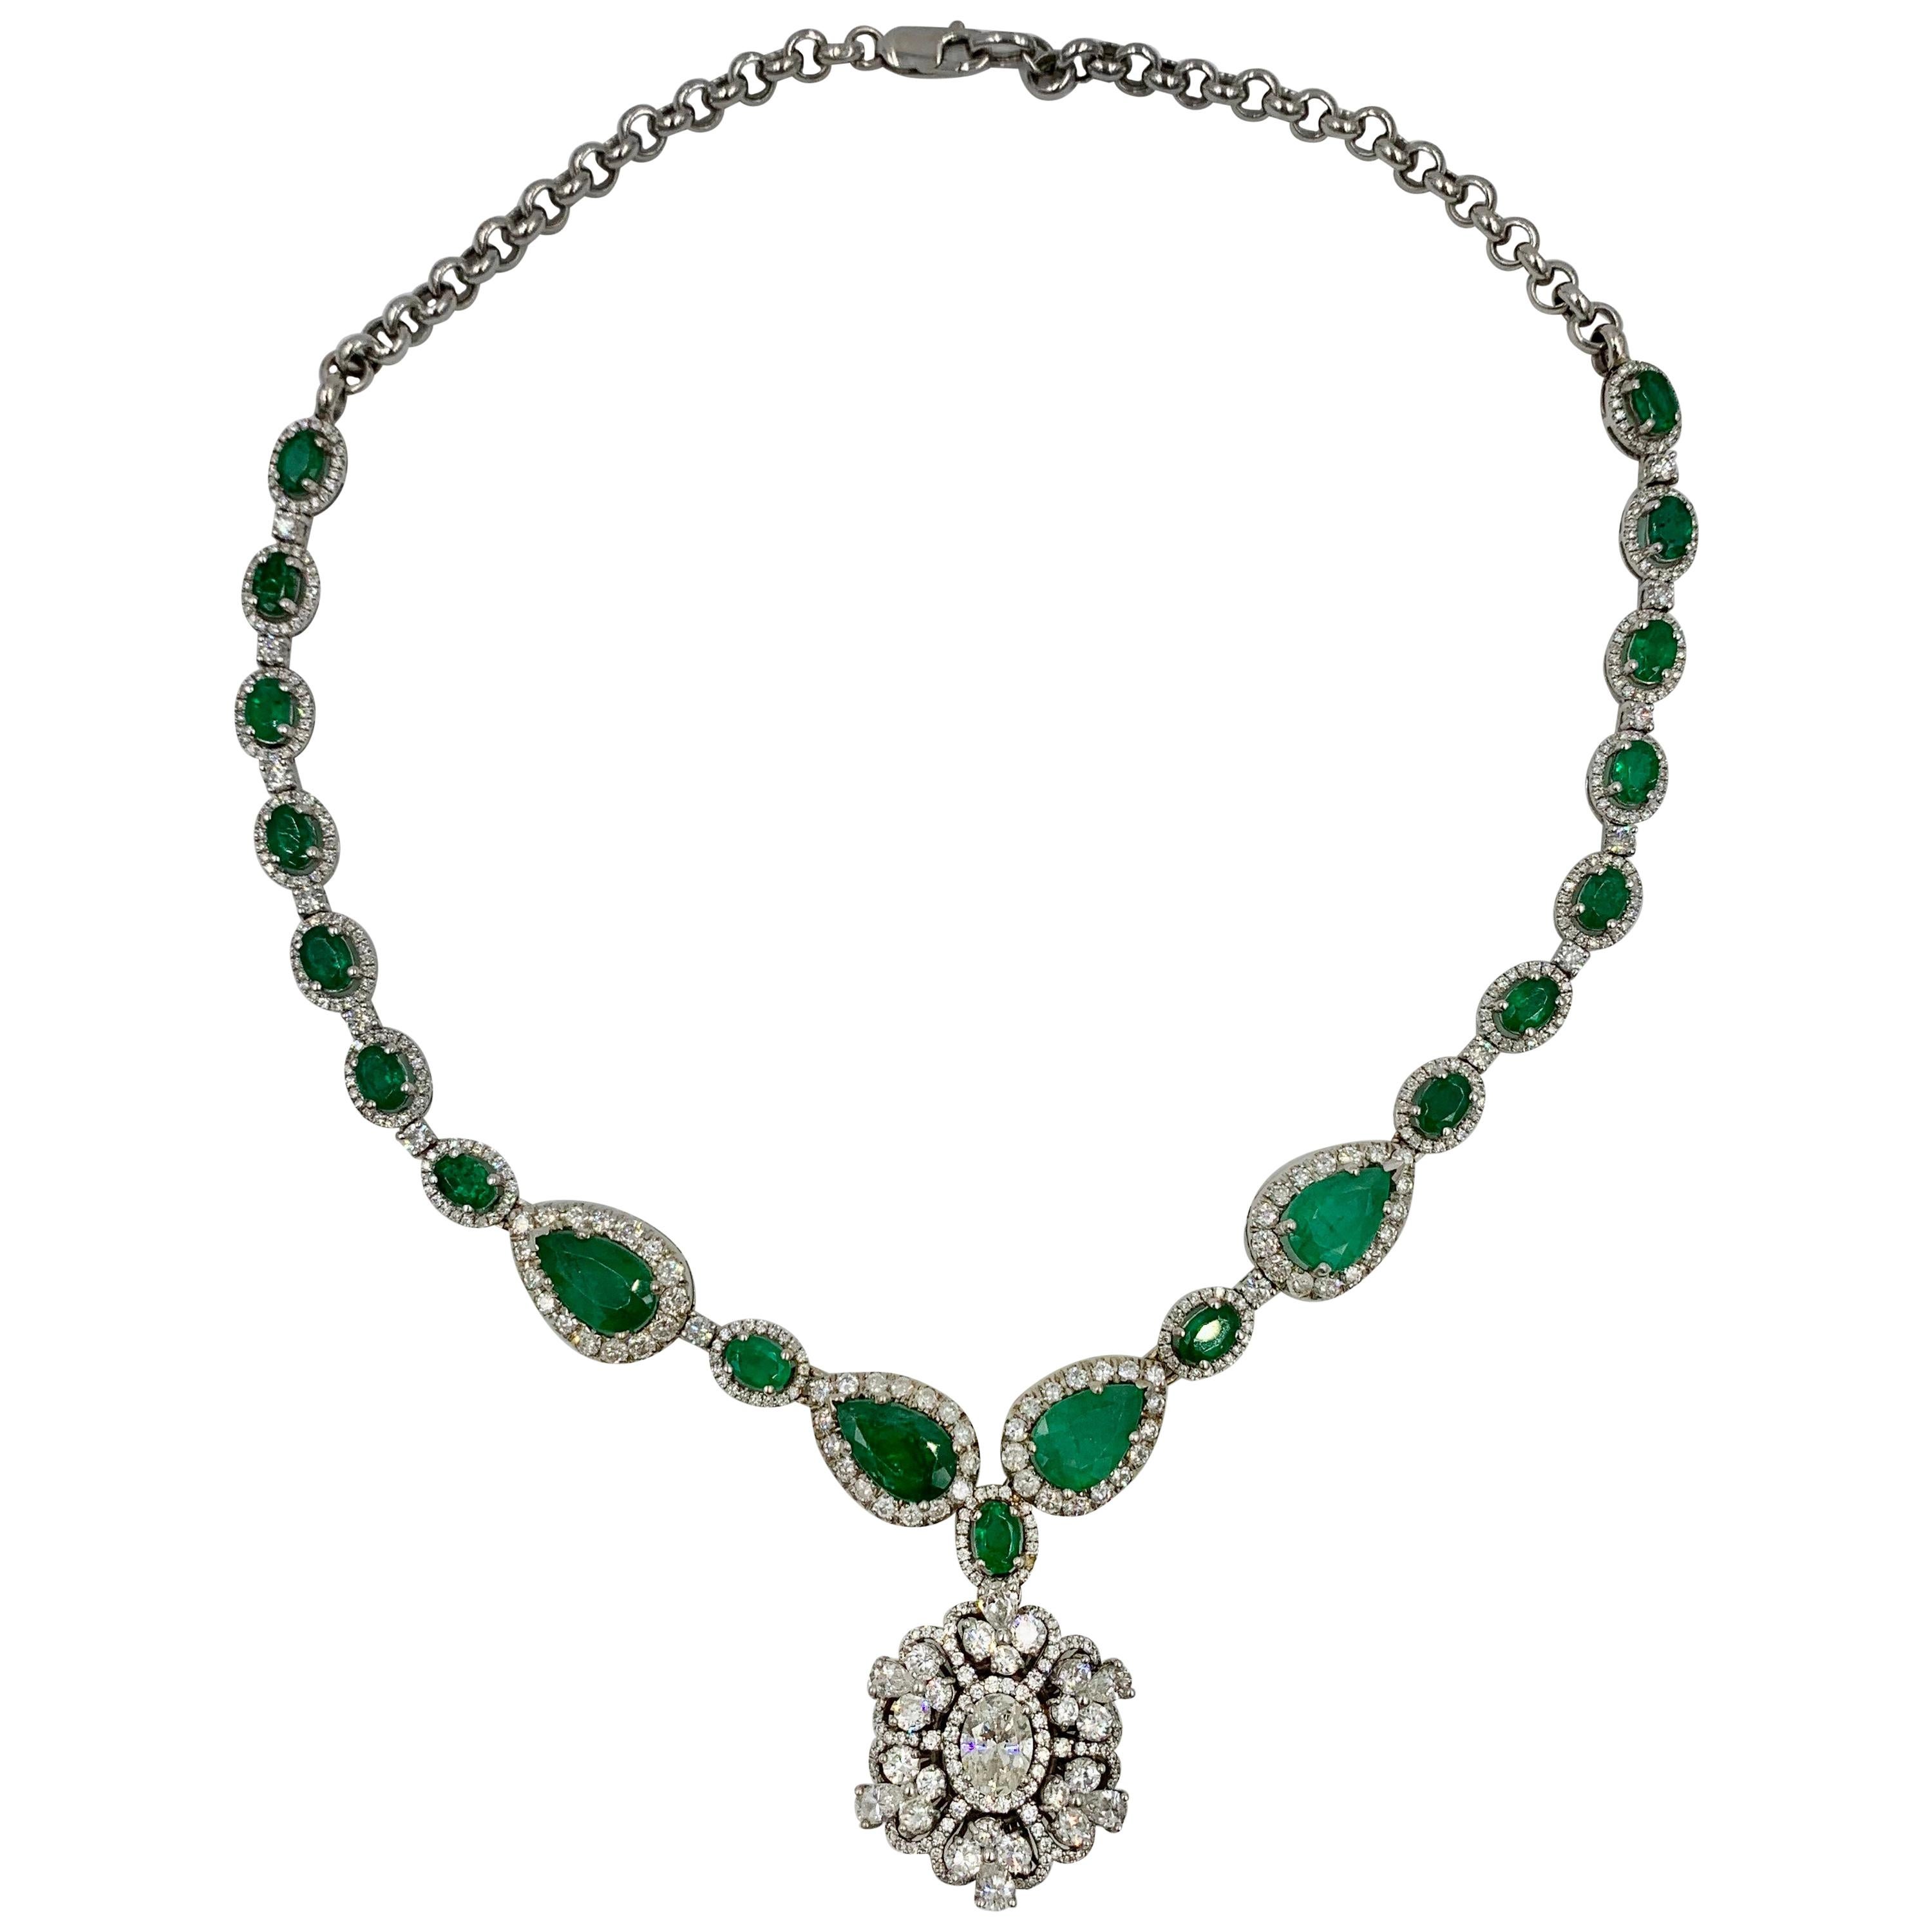 This is a spectacular Antique Estate Emerald and Diamond Pendant Statement Necklace of great beauty.   The dramatic necklace features a Diamond Pendant with a central oval Brilliant Cut Diamond of approximately 1 Carat.  The center Diamond is a